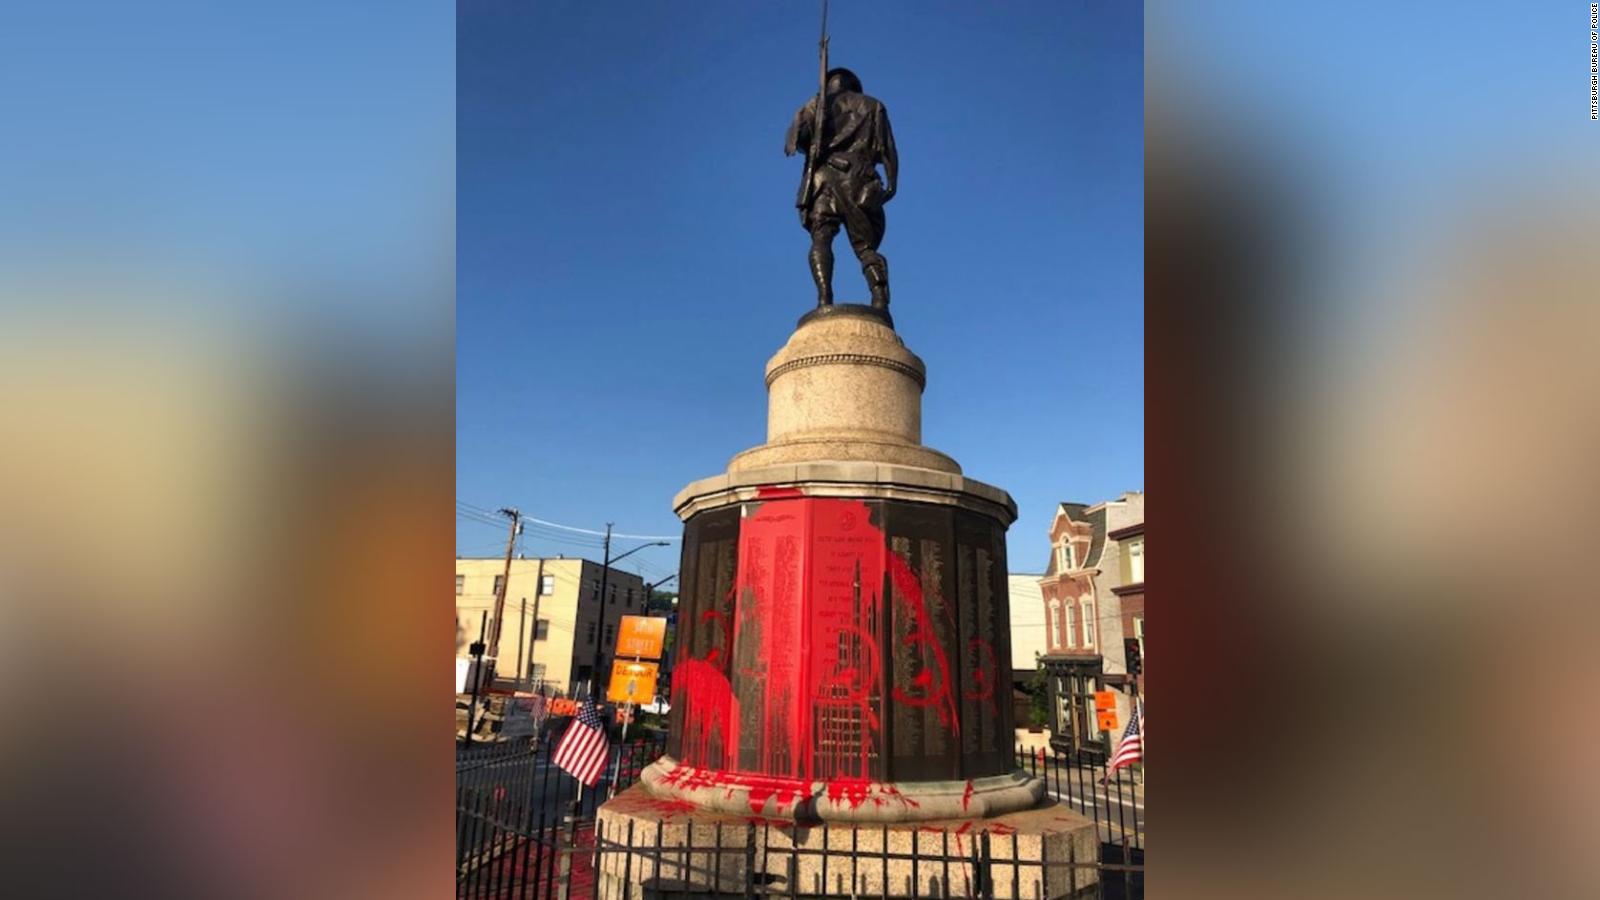 A WWI memorial in Pittsburg was vandalized on Memorial Day, police say